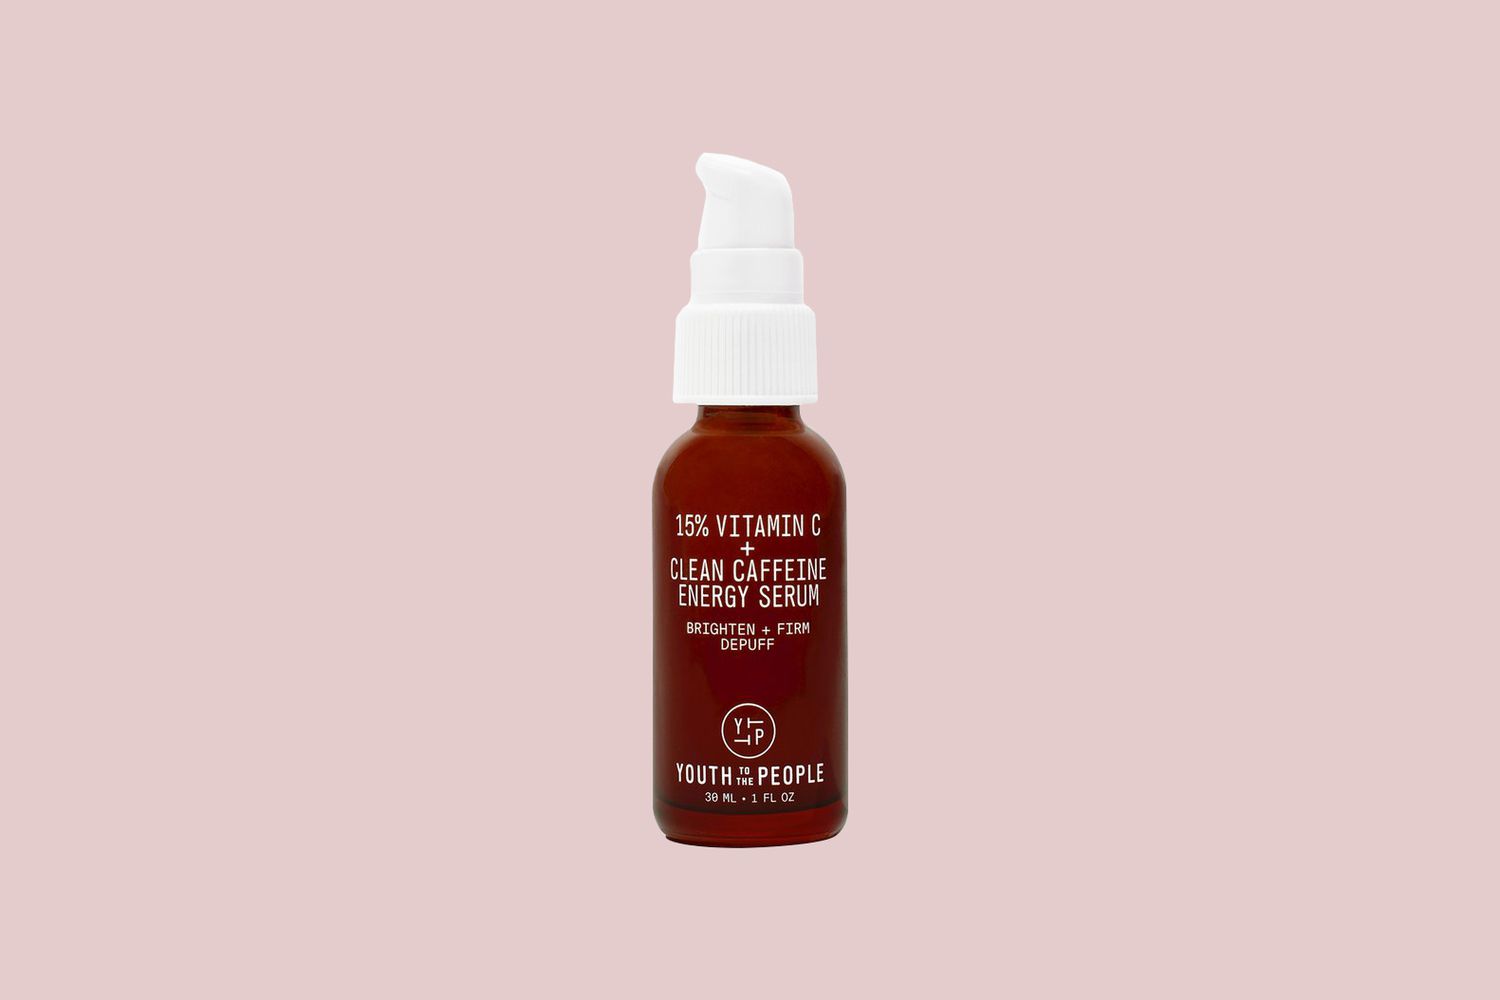 Youth to the People Vitamin C + Clean Caffeine Energy Serum